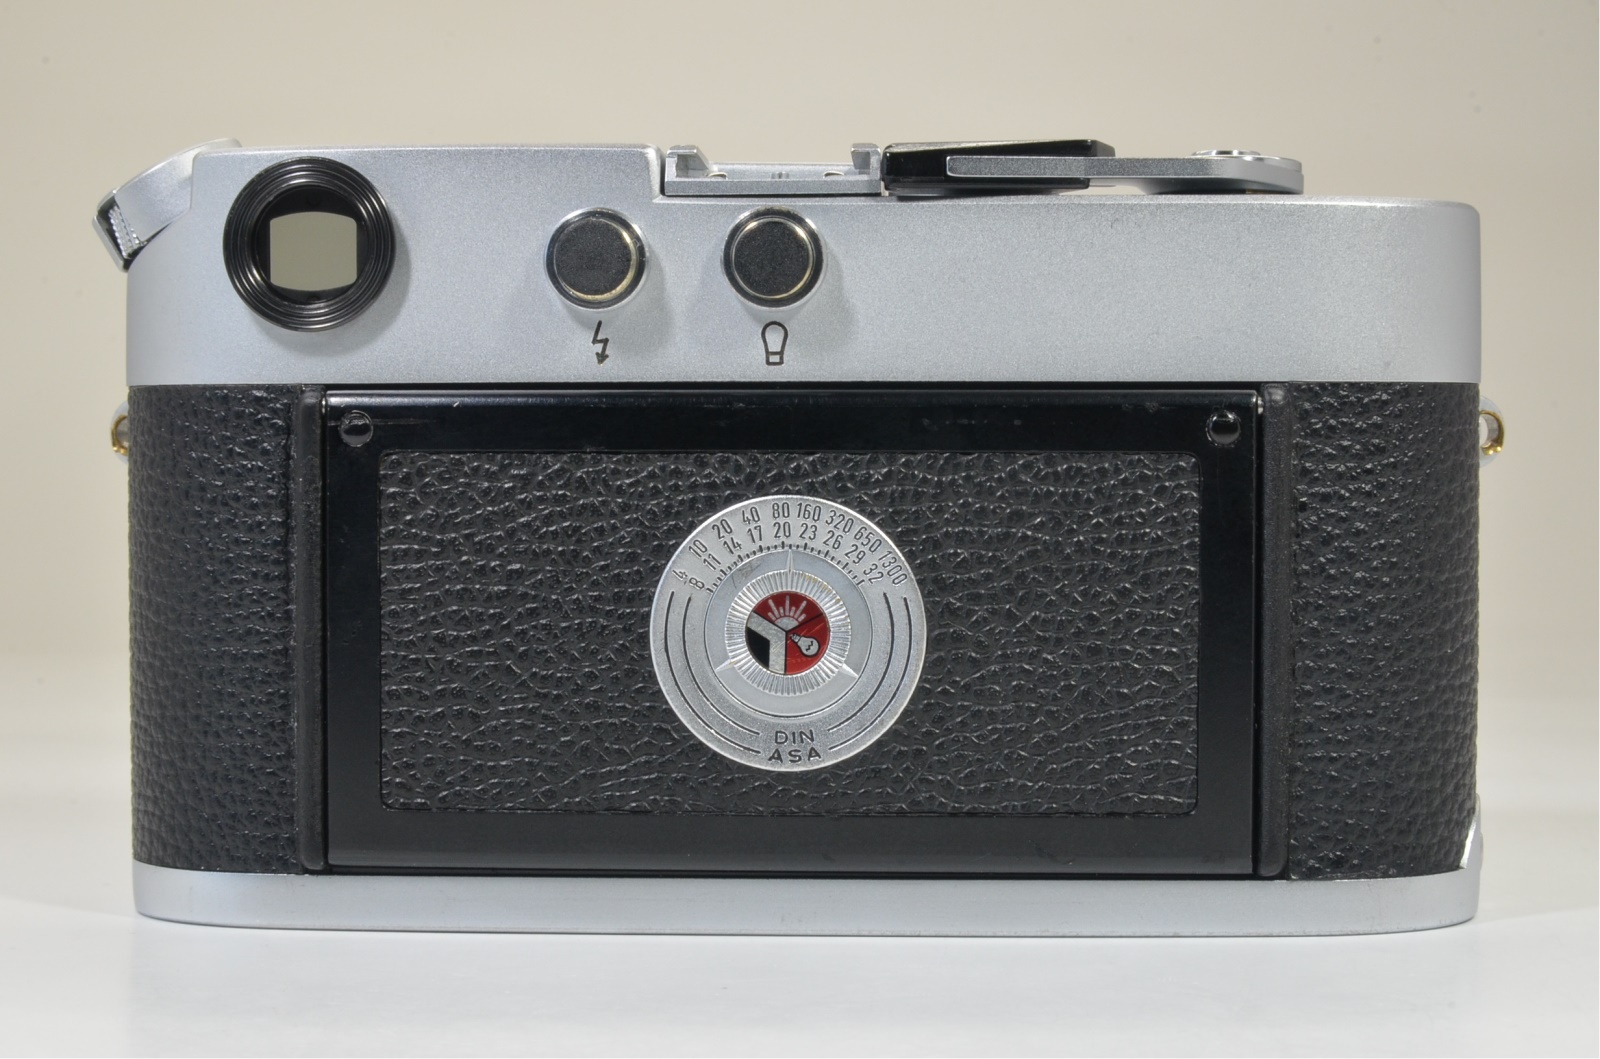 leica m4 silver chrome rangefinder camera s/n 1227904 year 1969 shooting tested